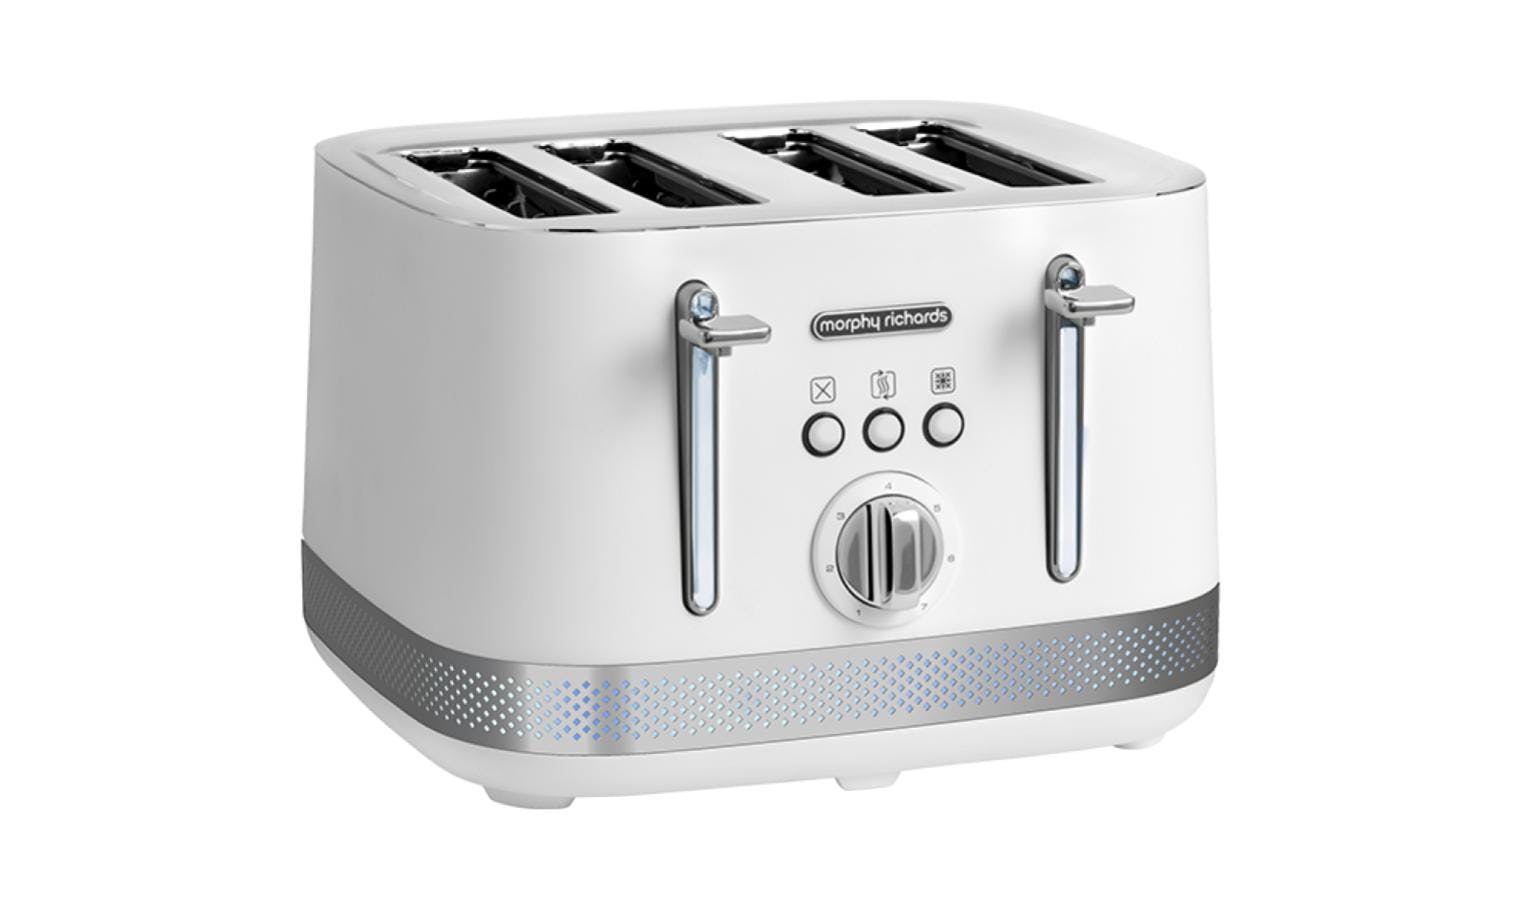 https://hnsgsfp.imgix.net/9/images/detailed/89/morphy-richards-illumination-toaster-248021-4slides-white_1.jpg?fit=fill&bg=0FFF&w=1534&h=900&auto=format,compress